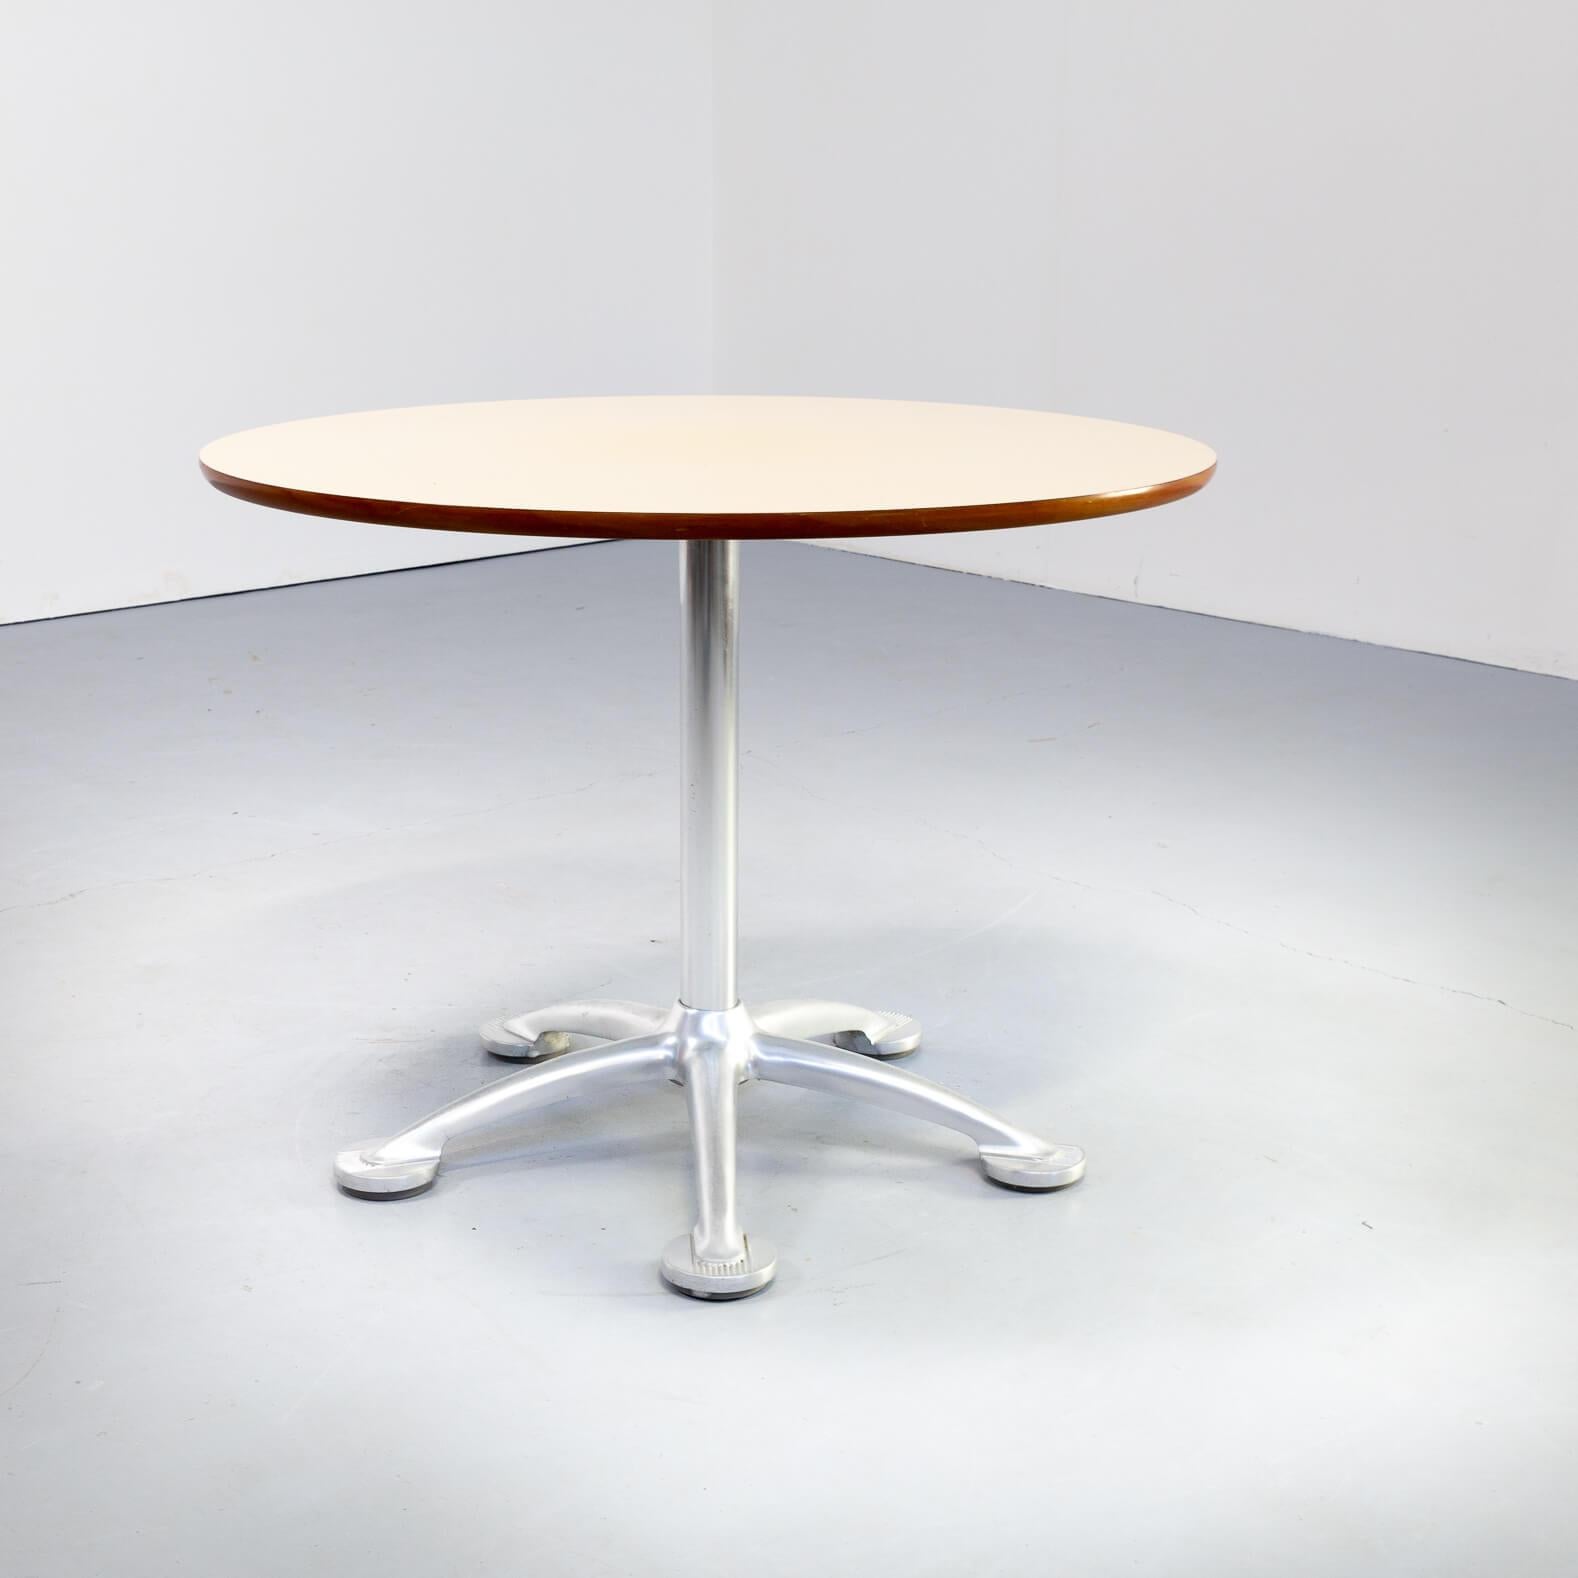 Spanish 1980s Jorge Pensi Round Dining Table for Amat3 For Sale